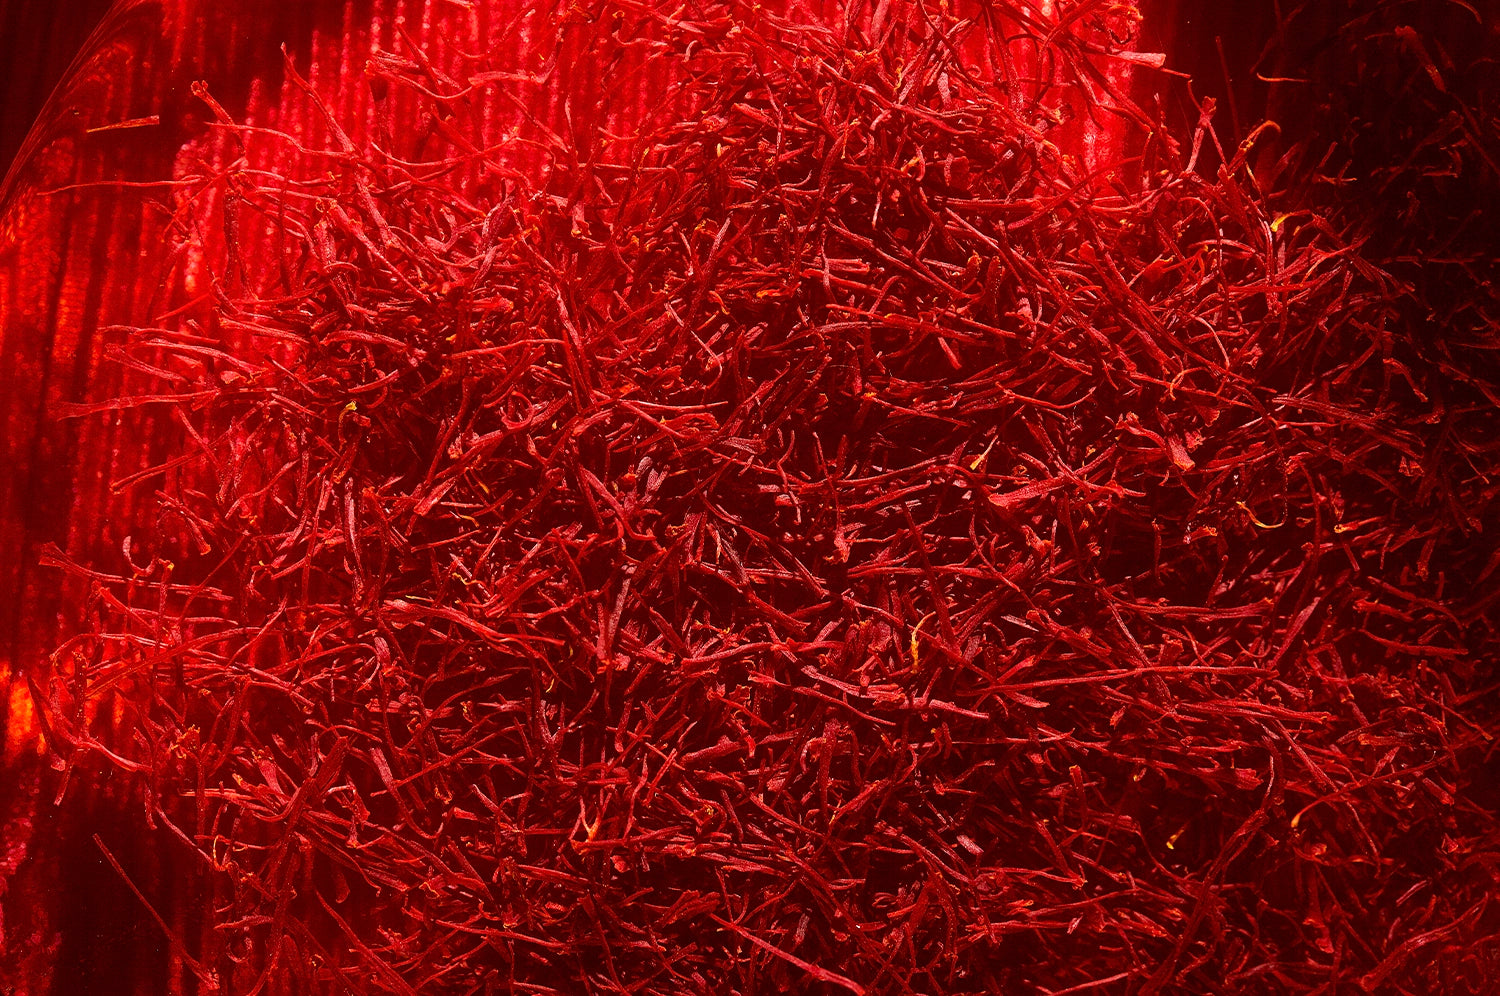 A close-up view of a pile of saffron threads from The Fullest.